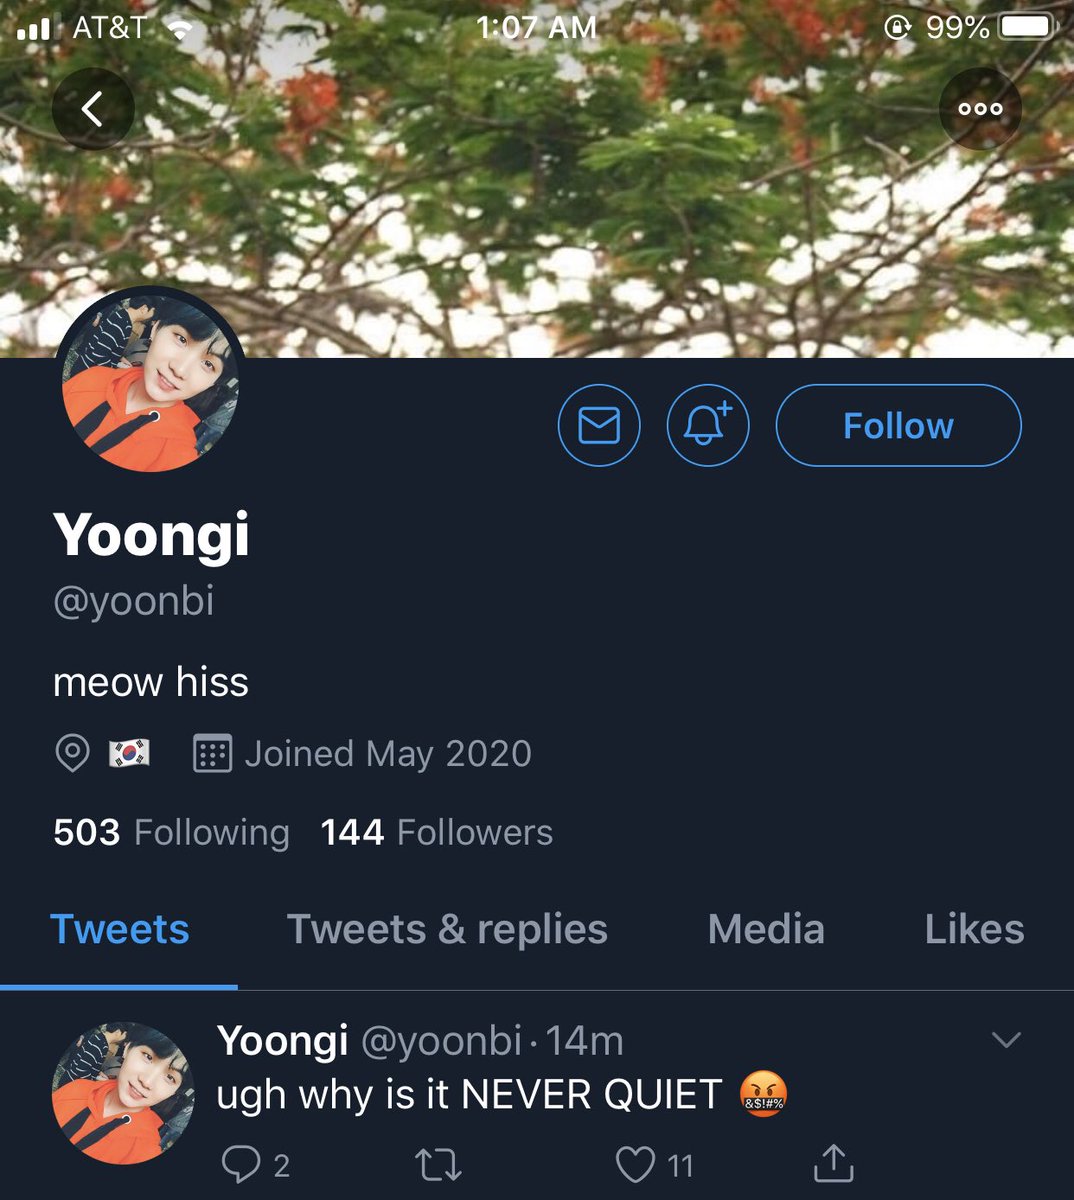 Yoon’s profiles (I revamped his ASMR one)